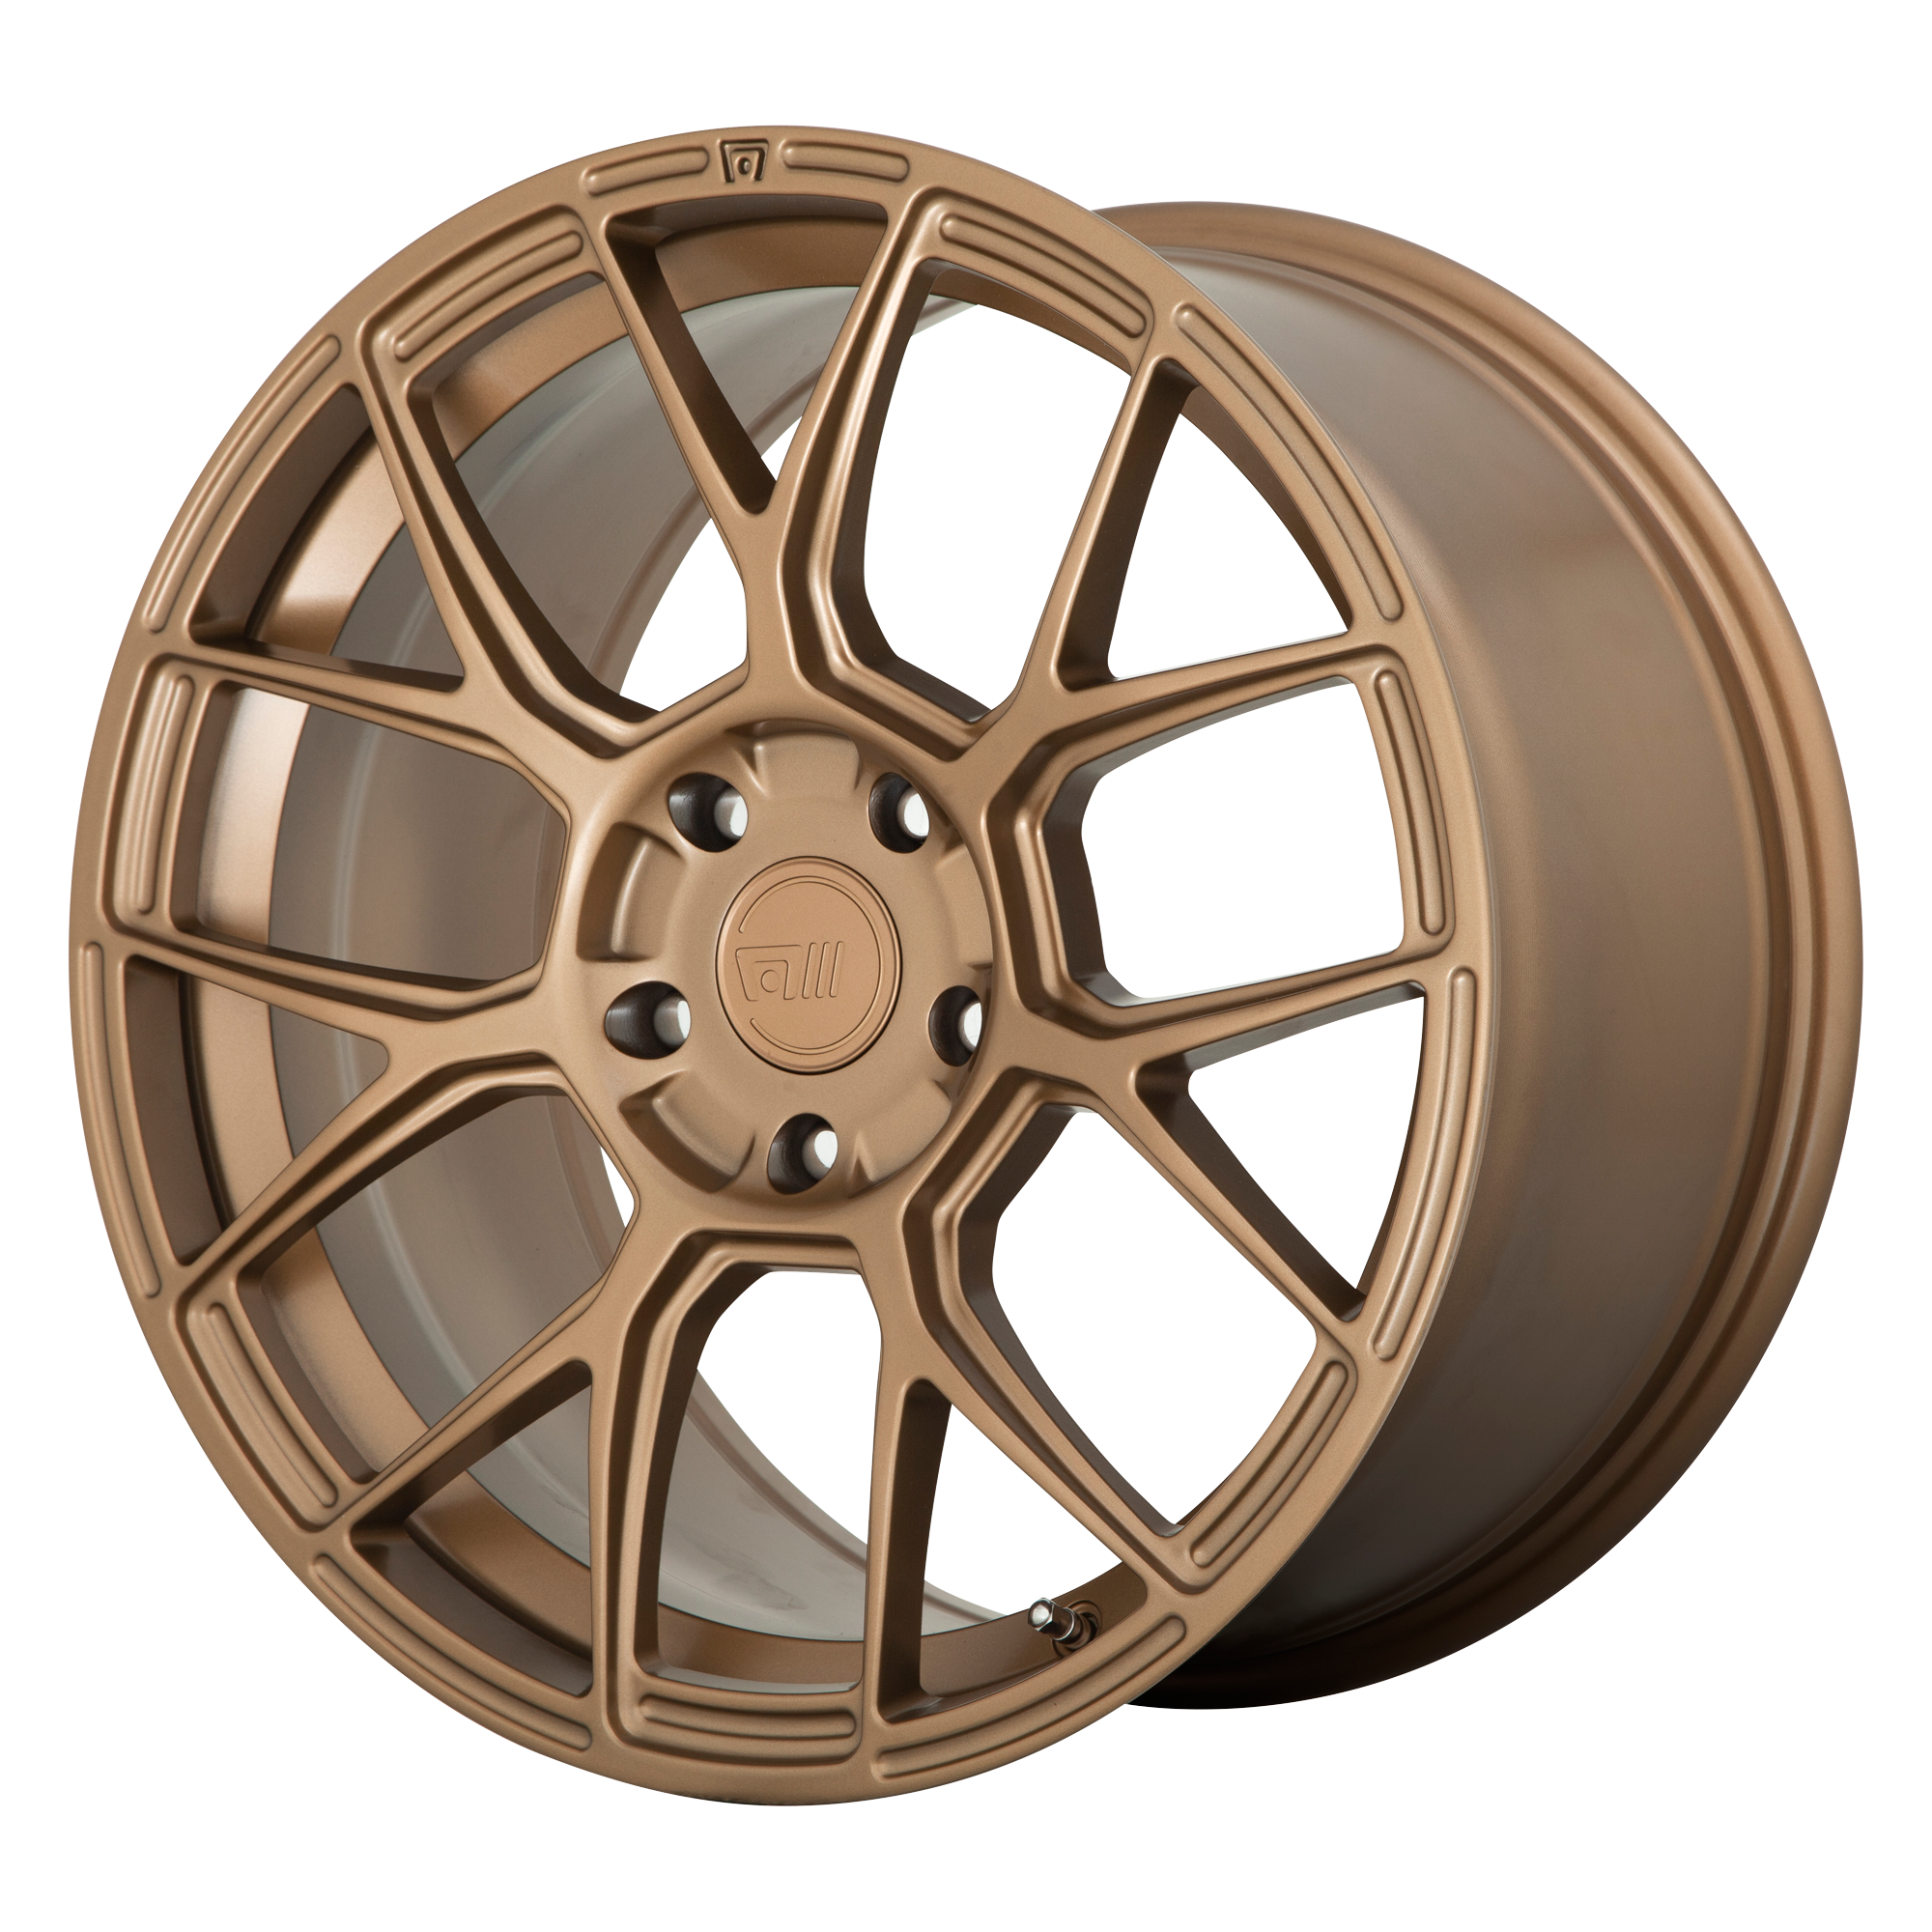 CM7 17x8 5x100.00 MATTE BRONZE (38 mm) - Tires and Engine Performance